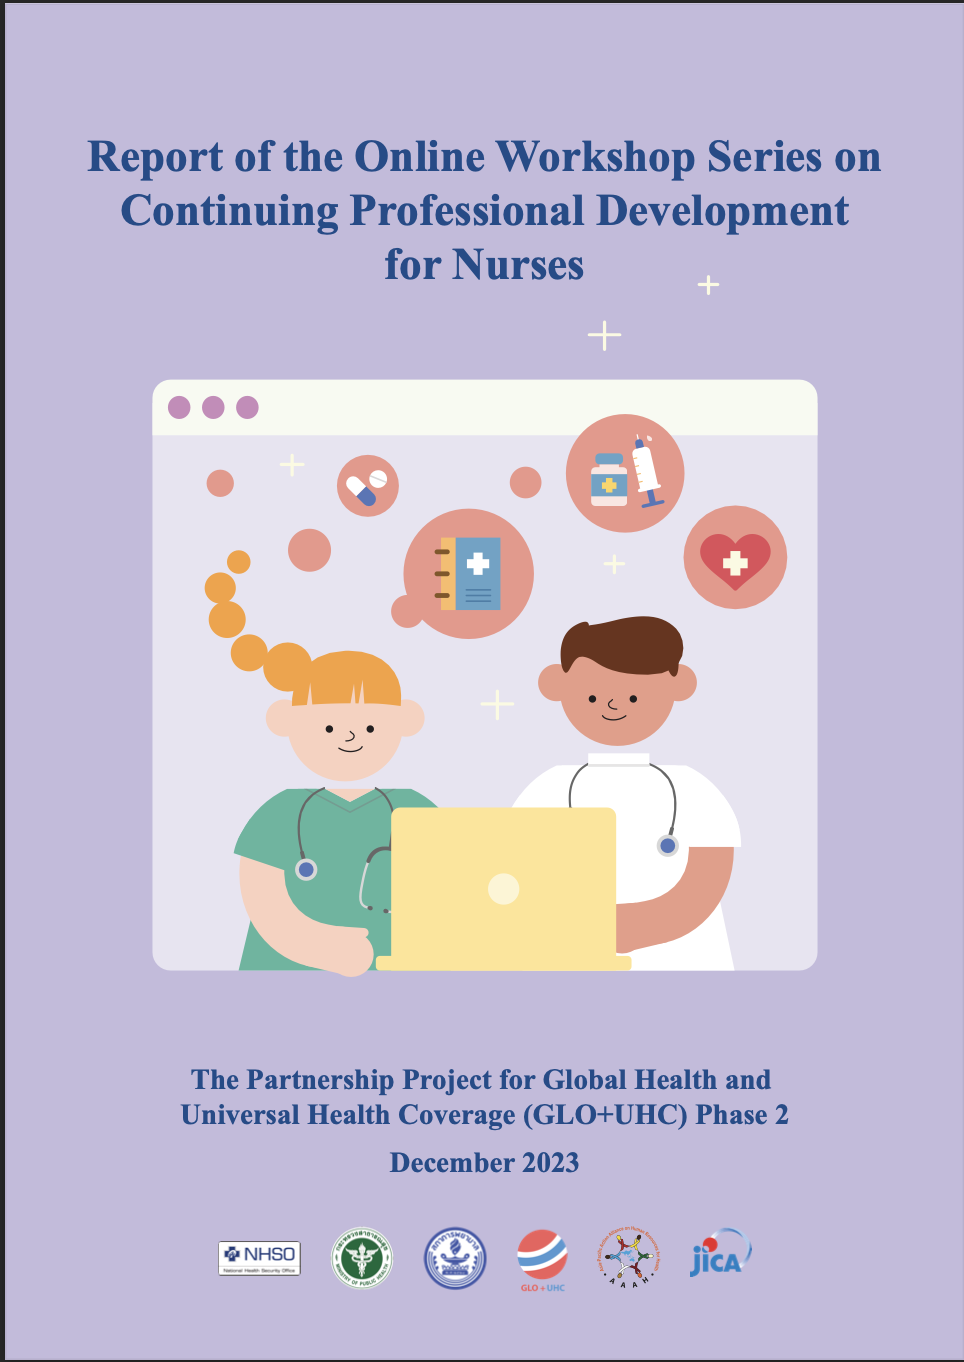 Report of the Online Workshop Series on Continuing Professional Development for Nurses